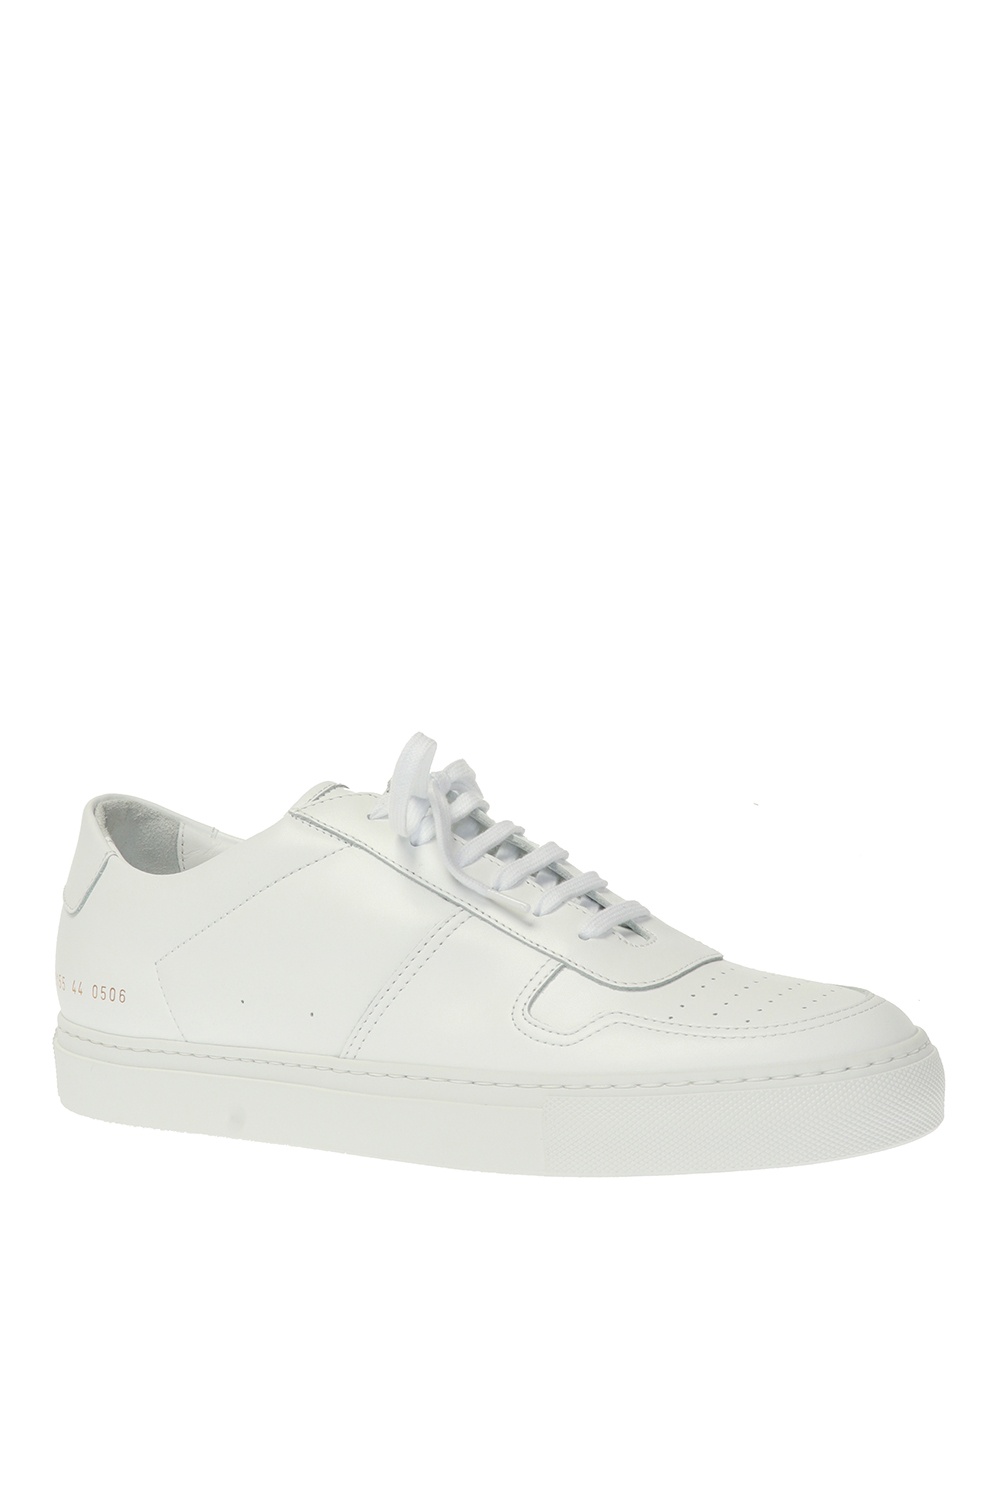 Common Projects ‘Bball’ sneakers